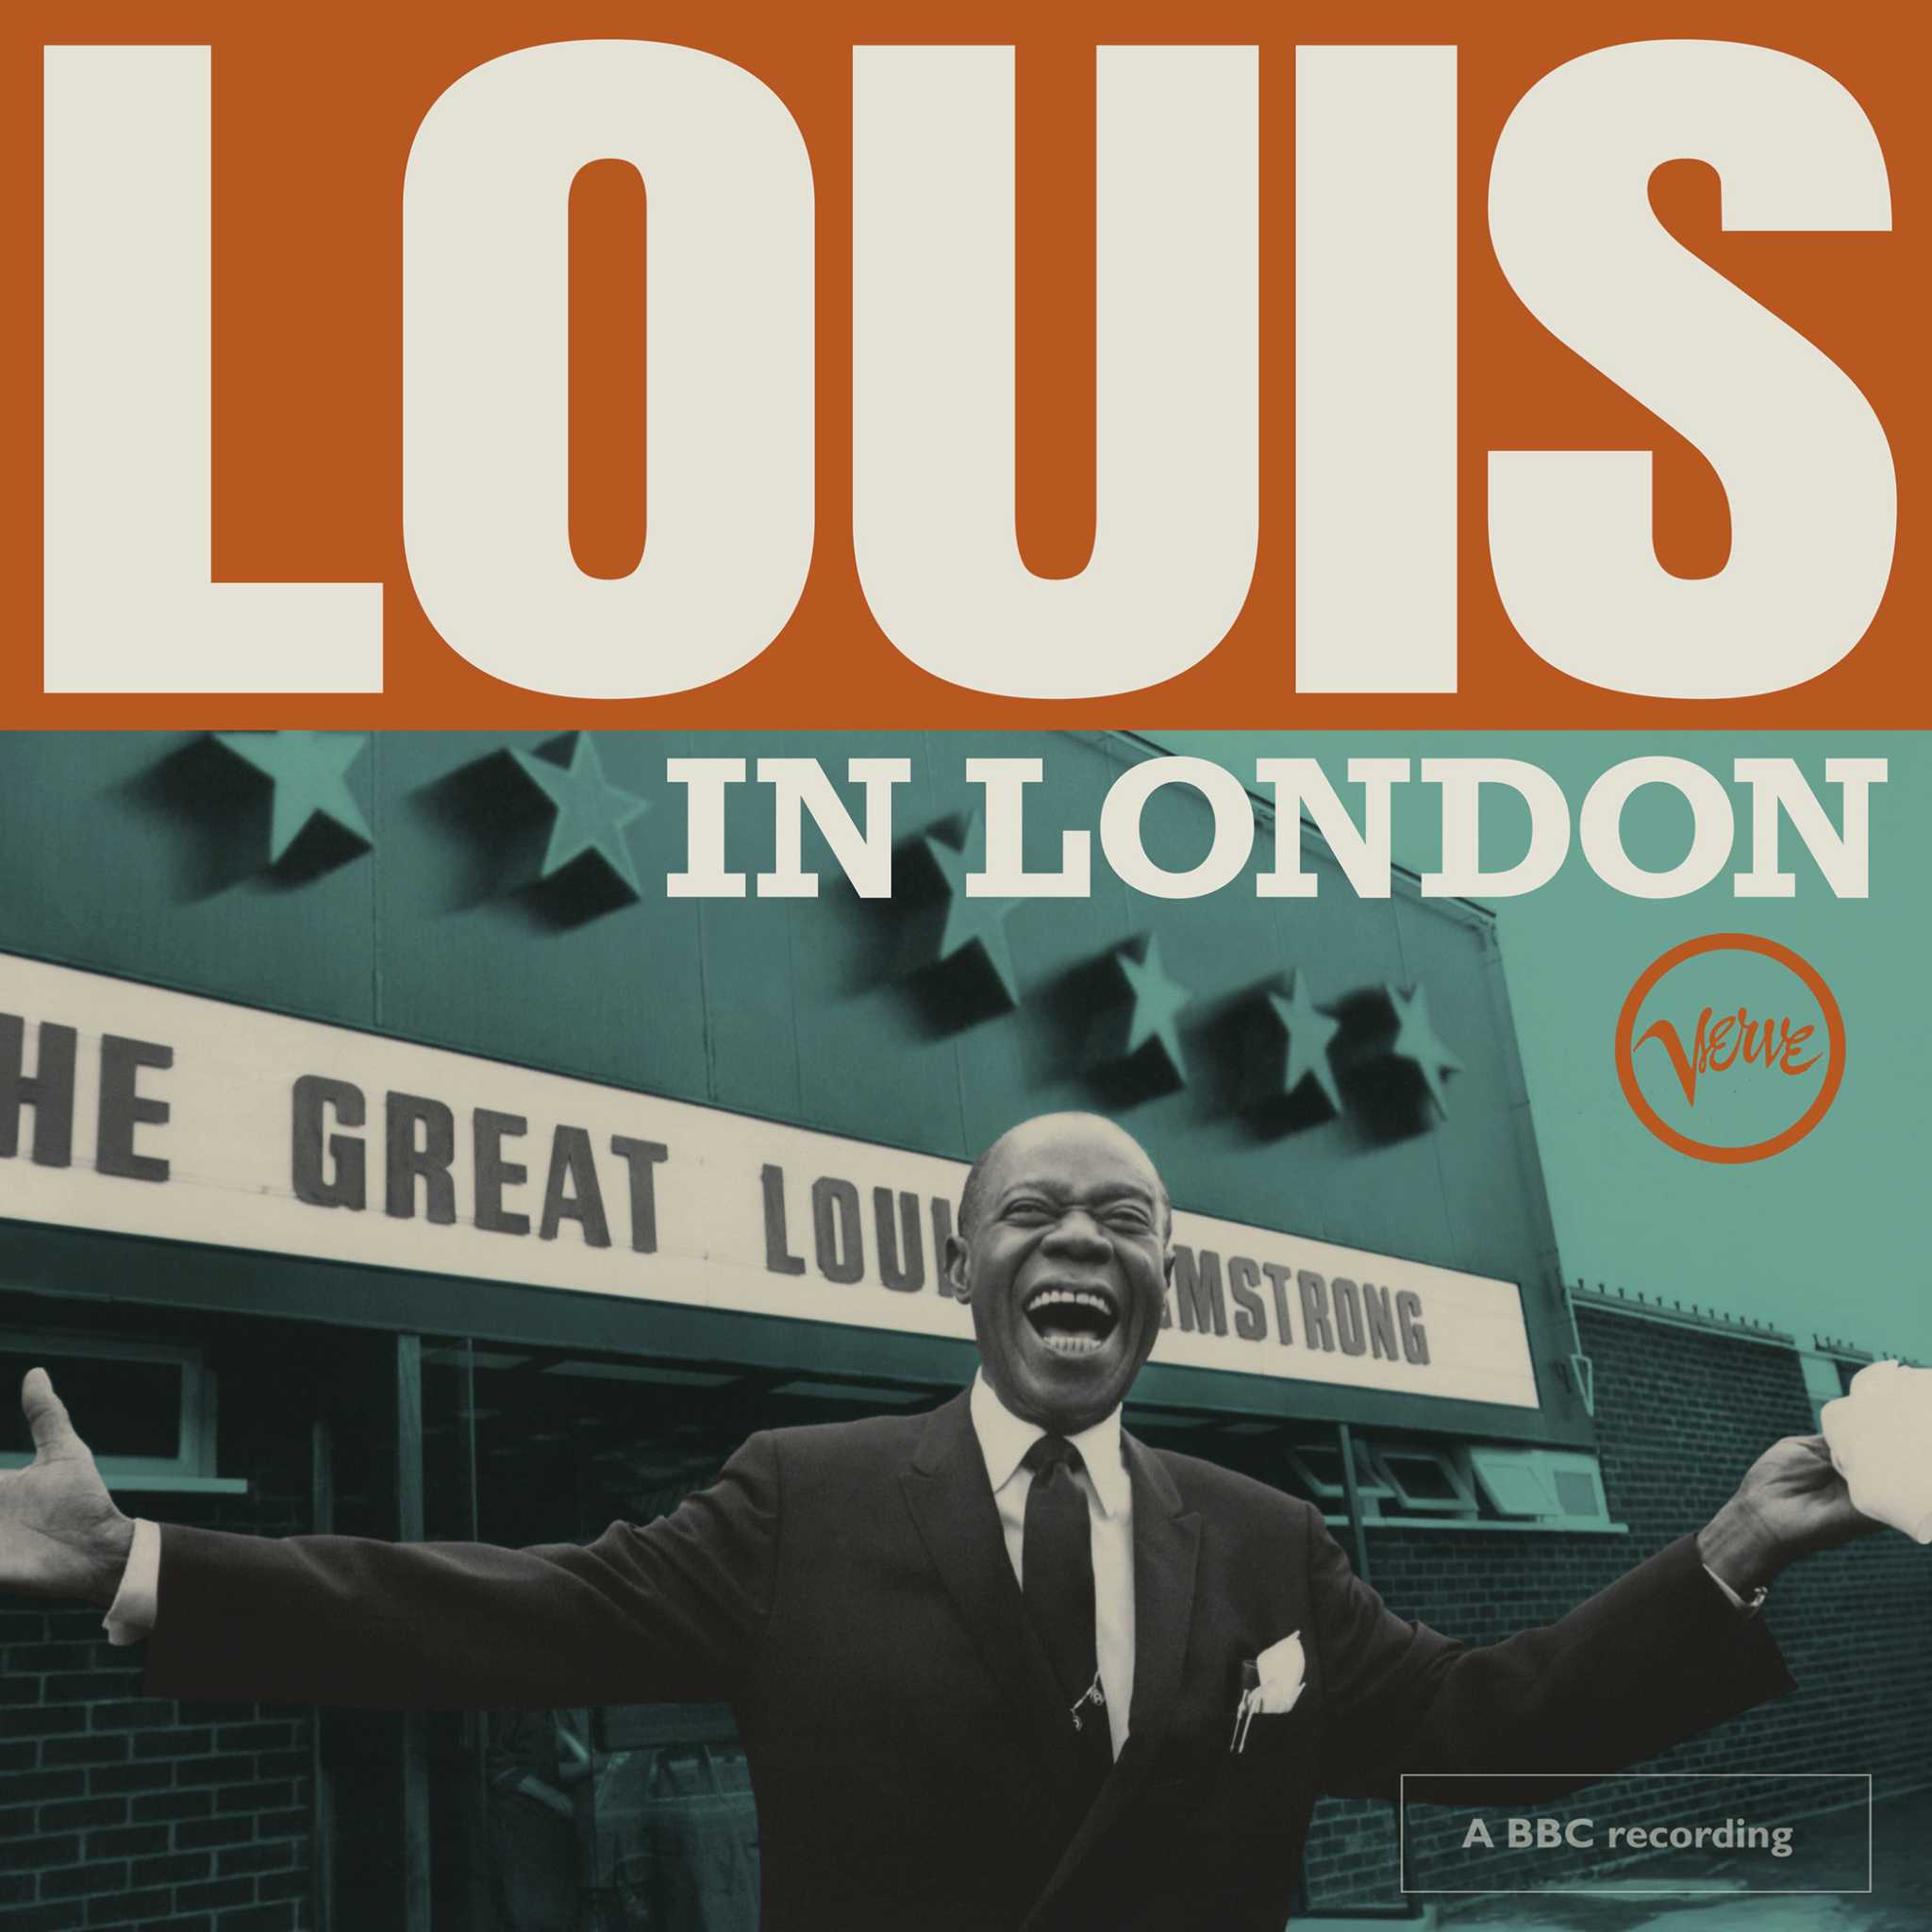 Music Review: 'Louis in London,' a 1968 live album, captures a joyful, late-career Louis Armstrong